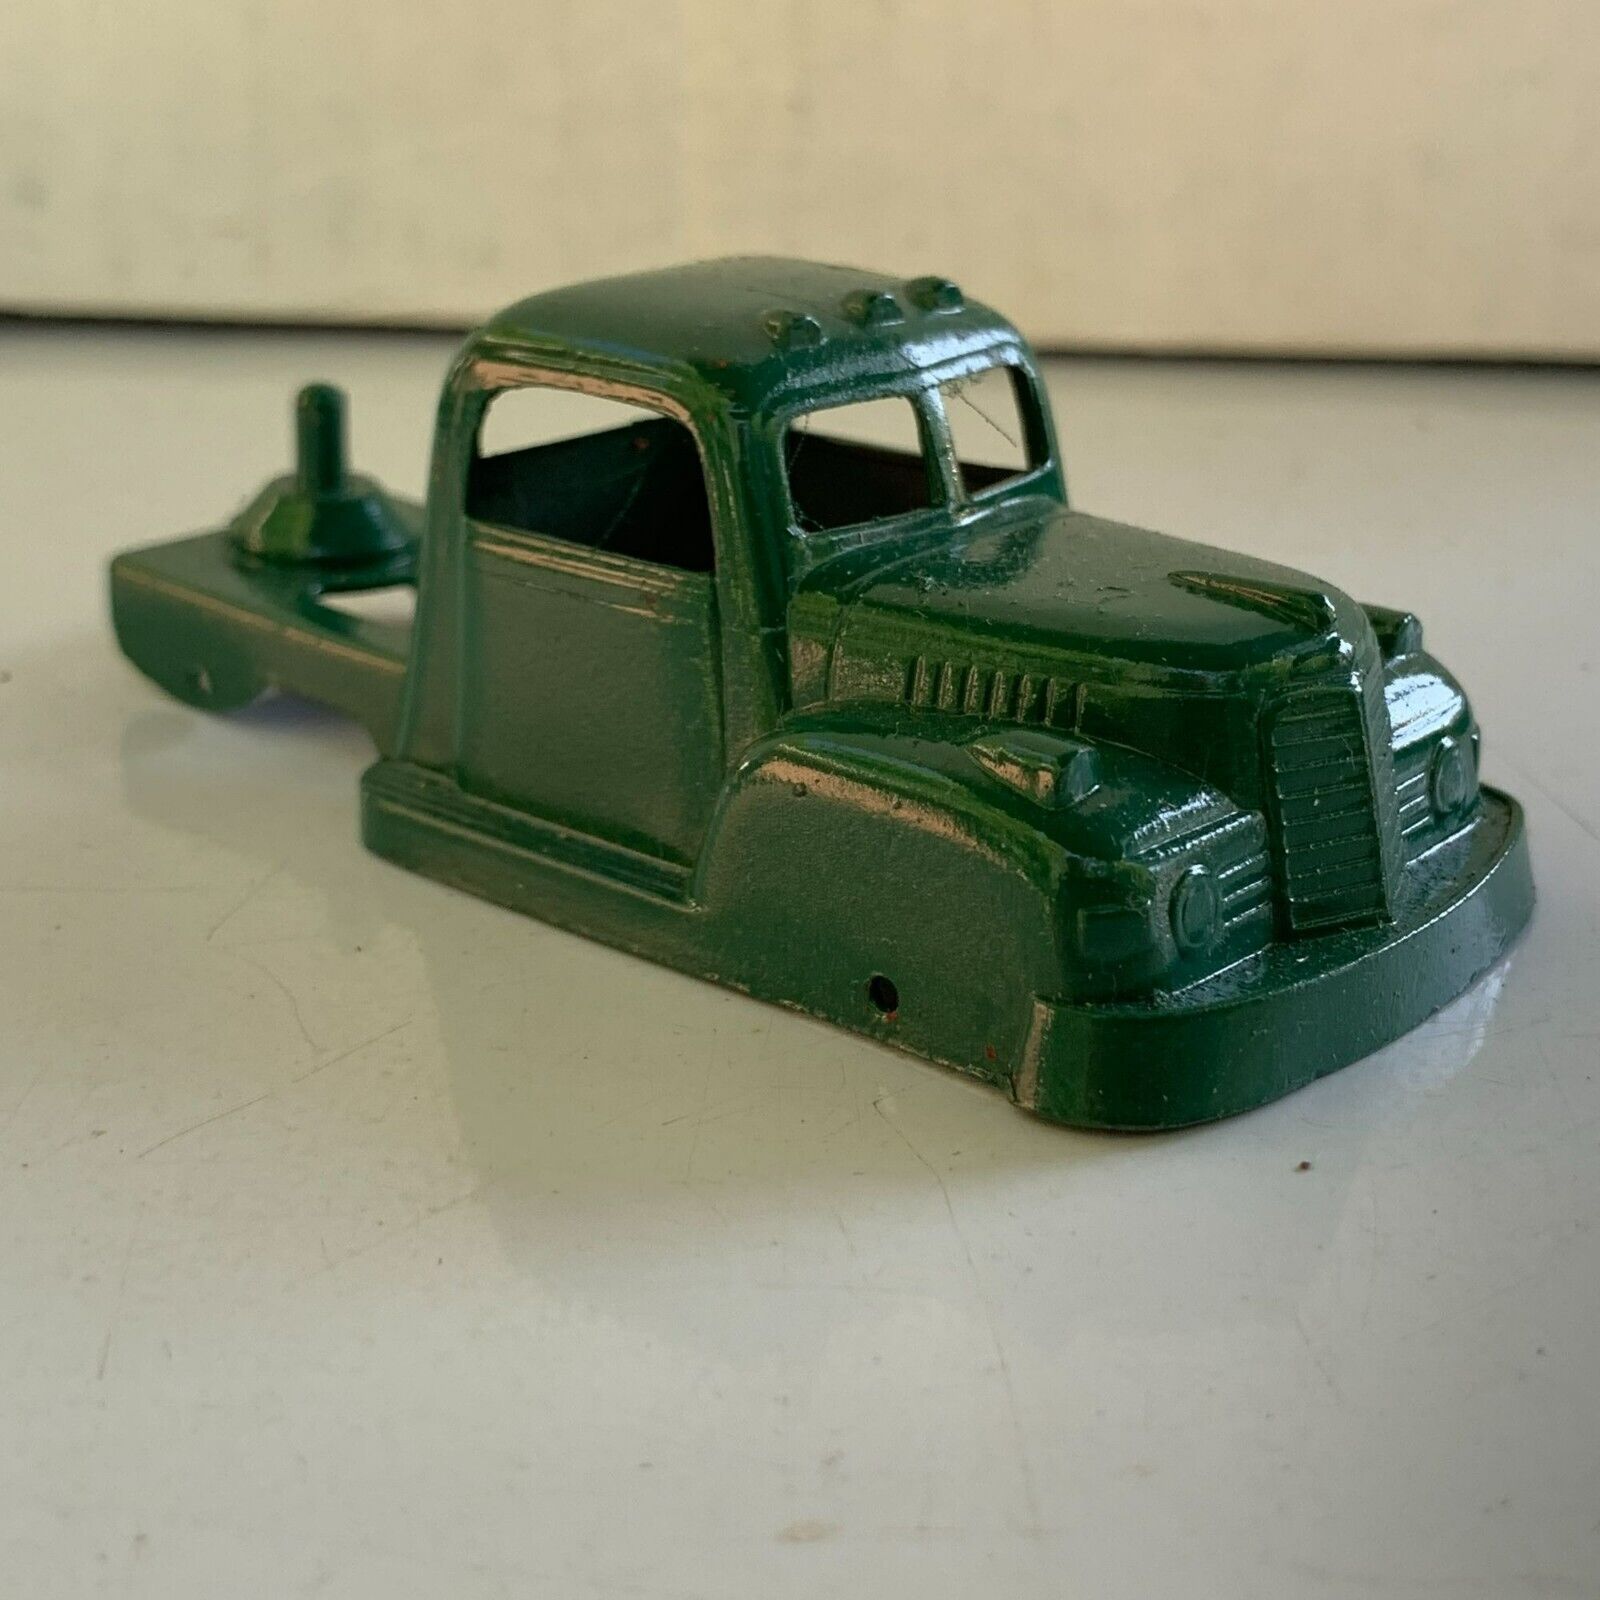 Tootsietoy Green International Semi Truck Cab, 1960s Collectible Toy Truck - $16.82